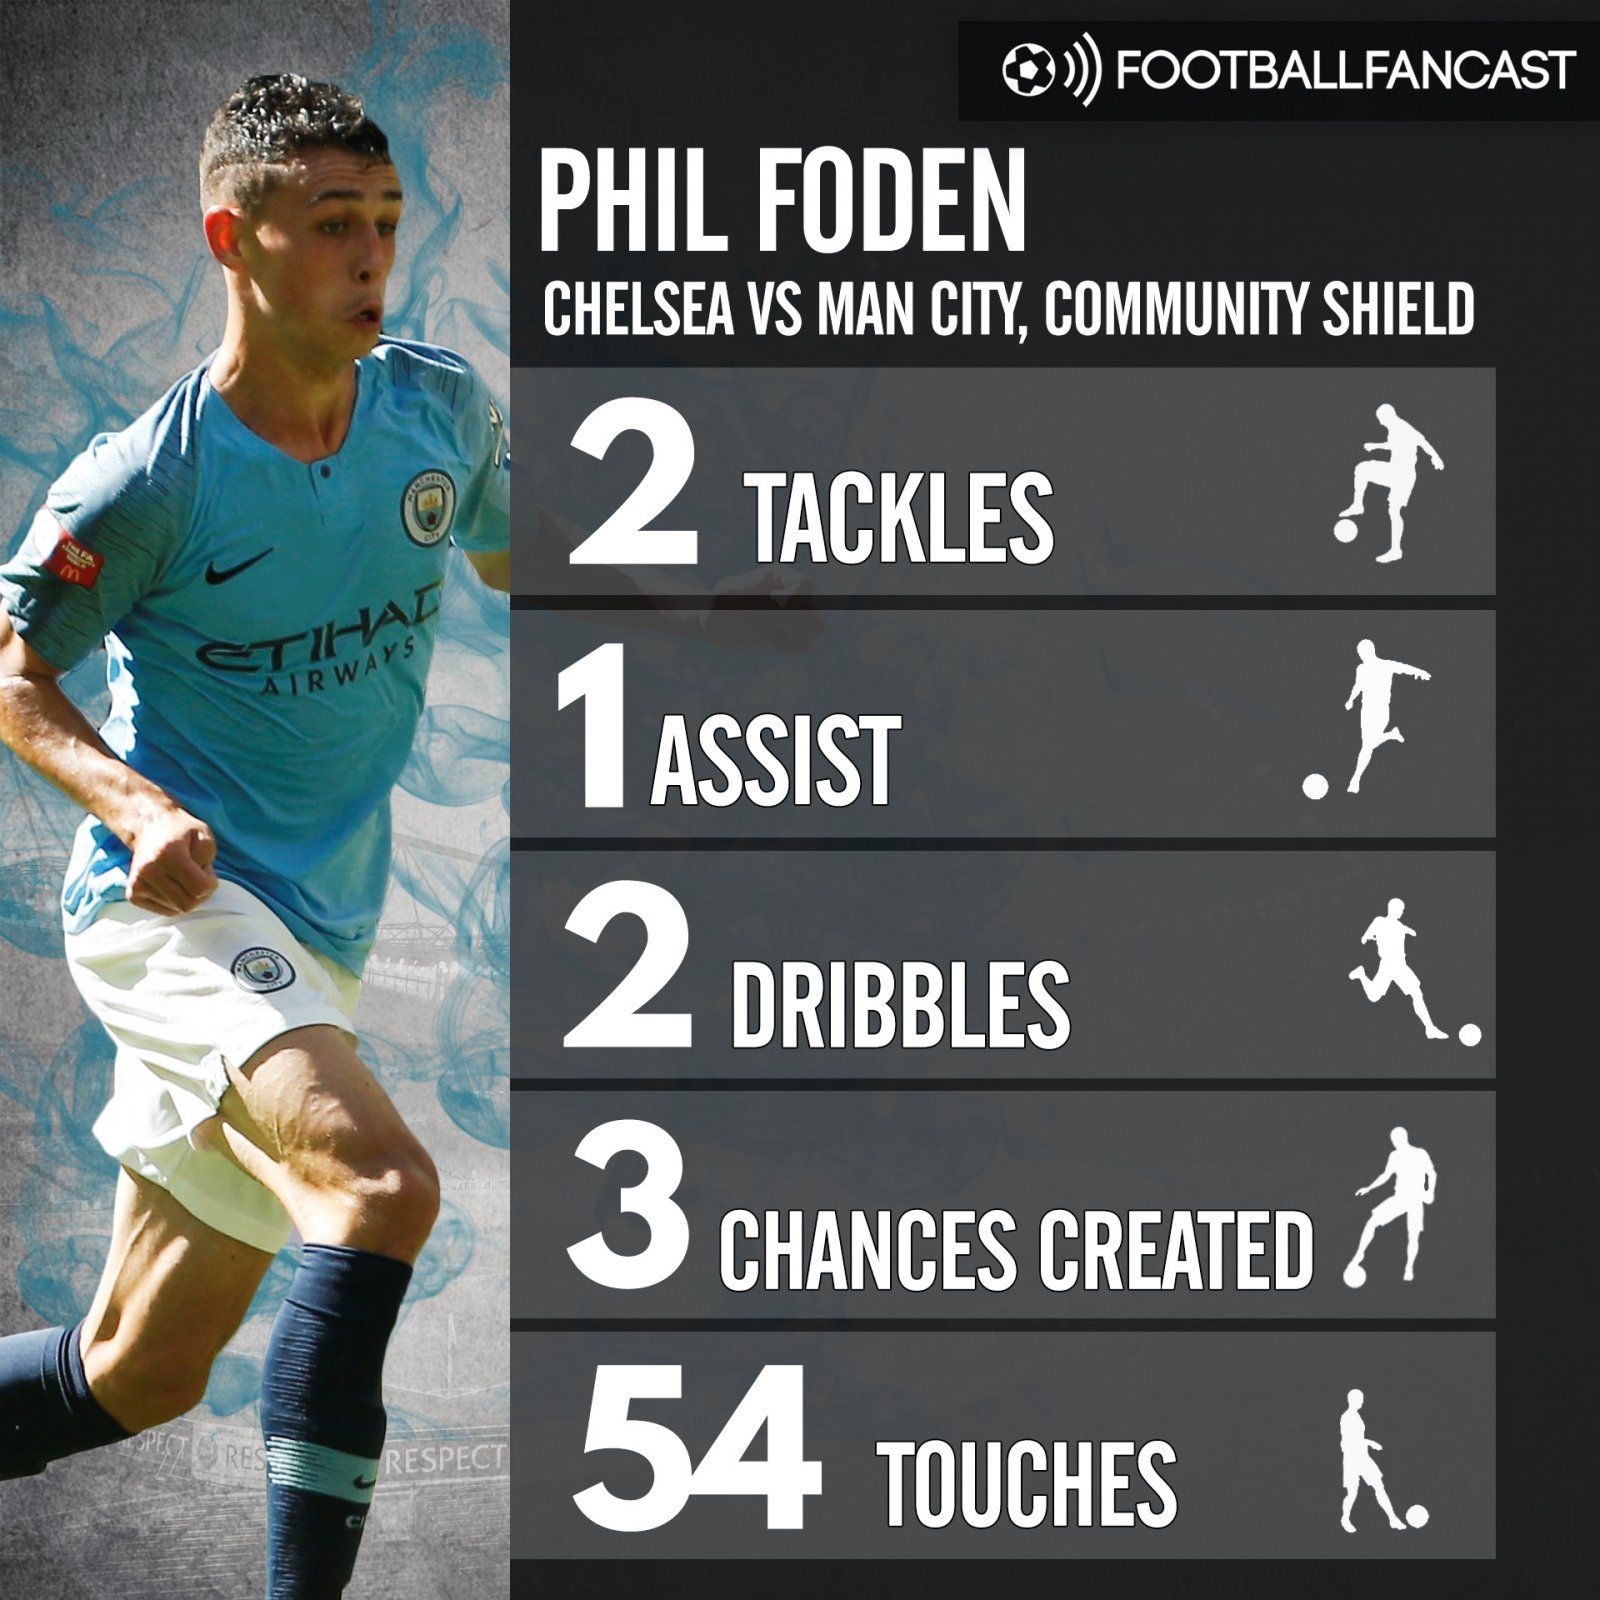 Phil Foden's stats from Manchester City's win over Chelsea